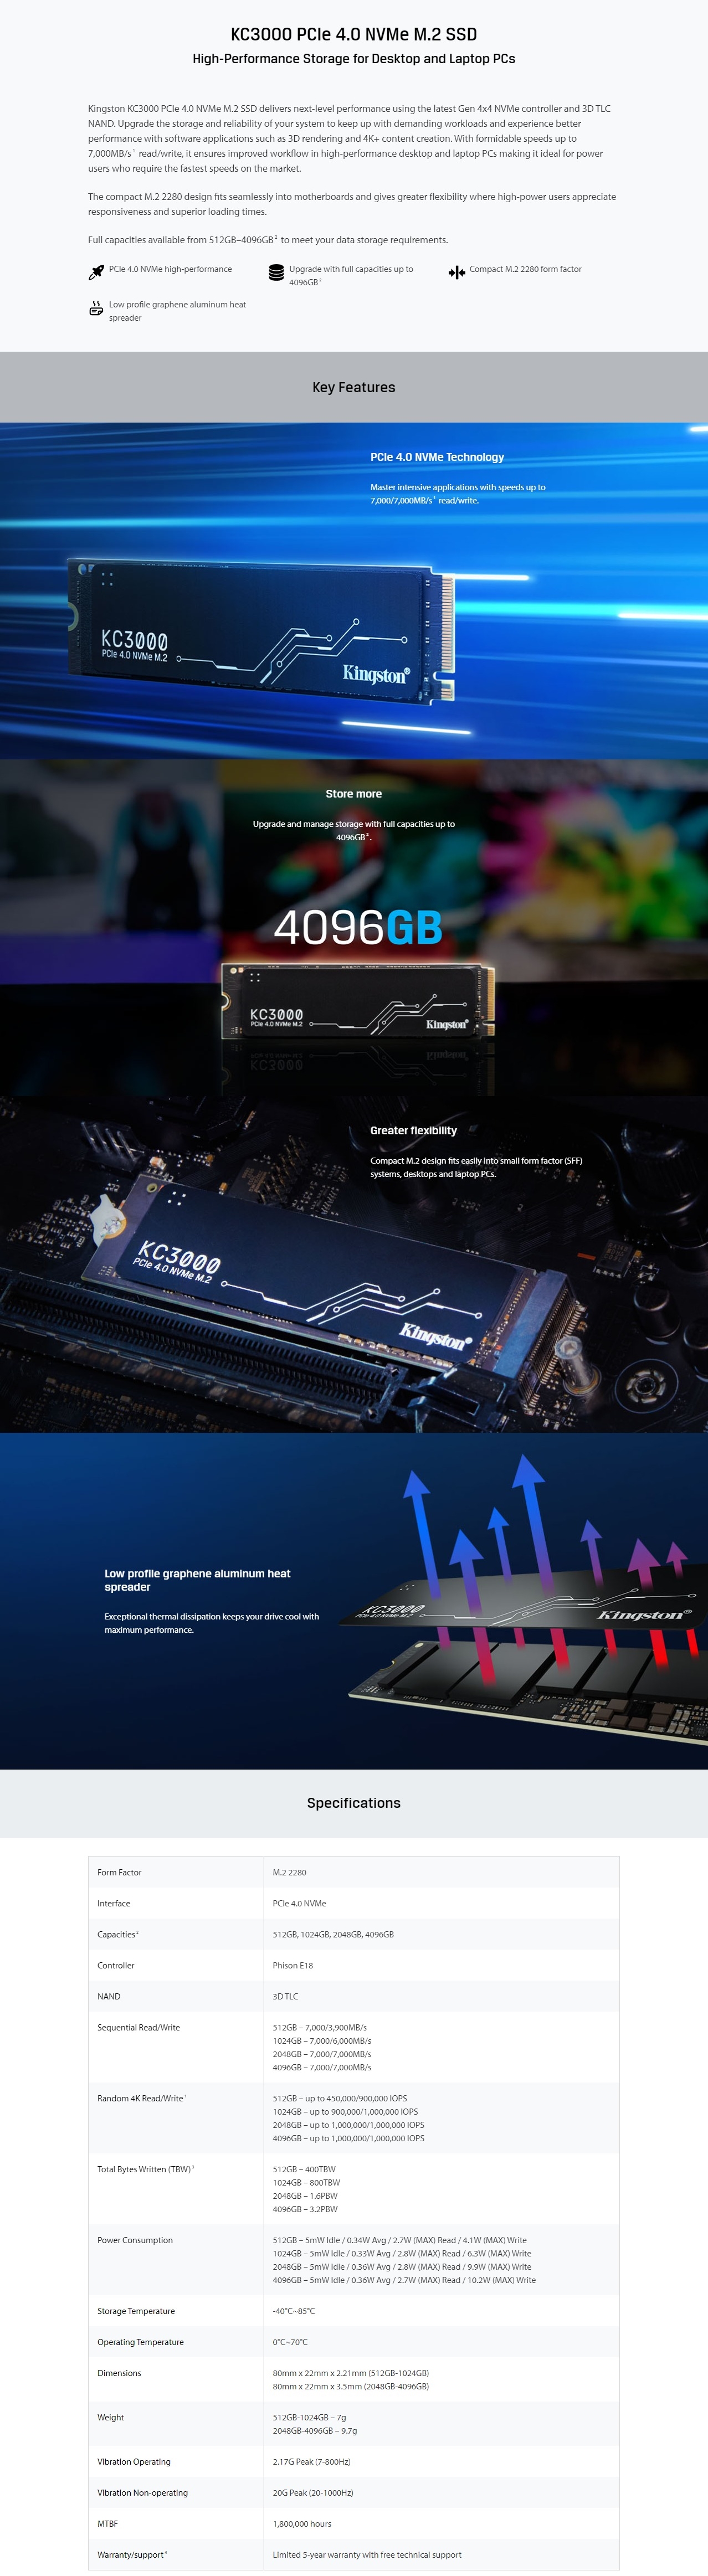 A large marketing image providing additional information about the product Kingston KC3000 PCIe Gen4 NVMe M.2 SSD - 2TB - Additional alt info not provided